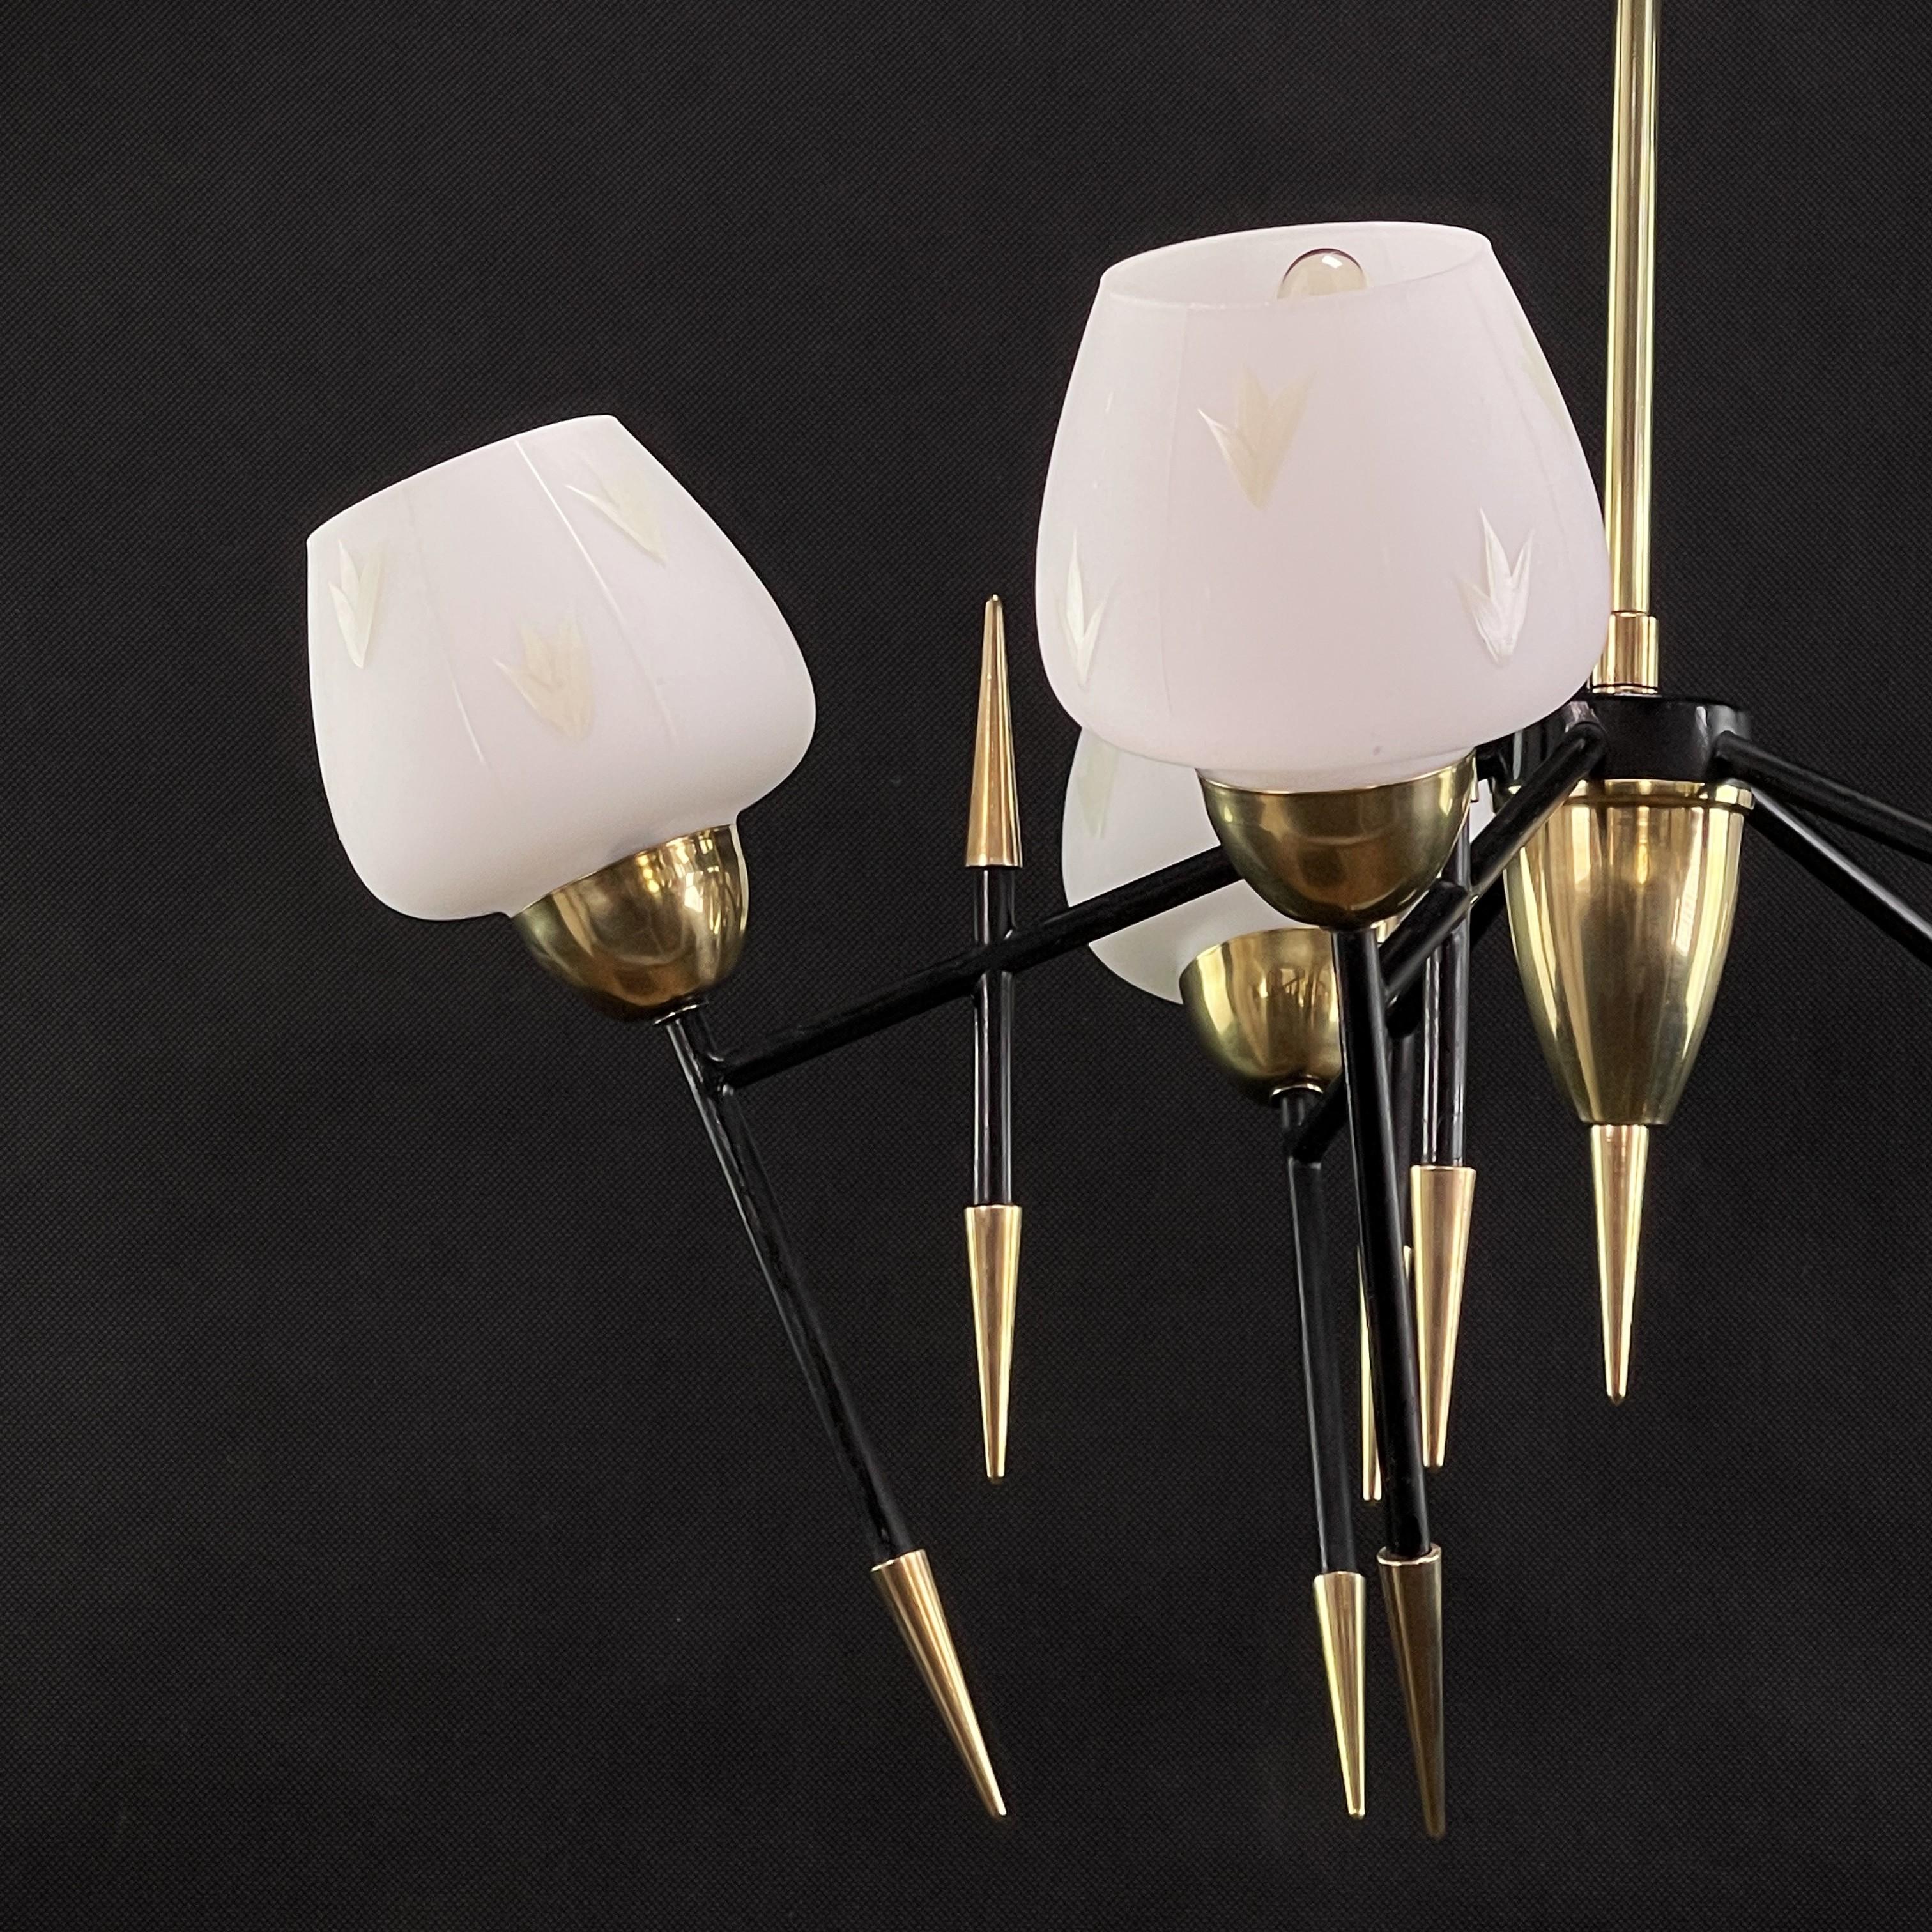 Mid-Century Sputnik Ceiling Lamp in the Style of Maison Lunel, 1950s For Sale 4